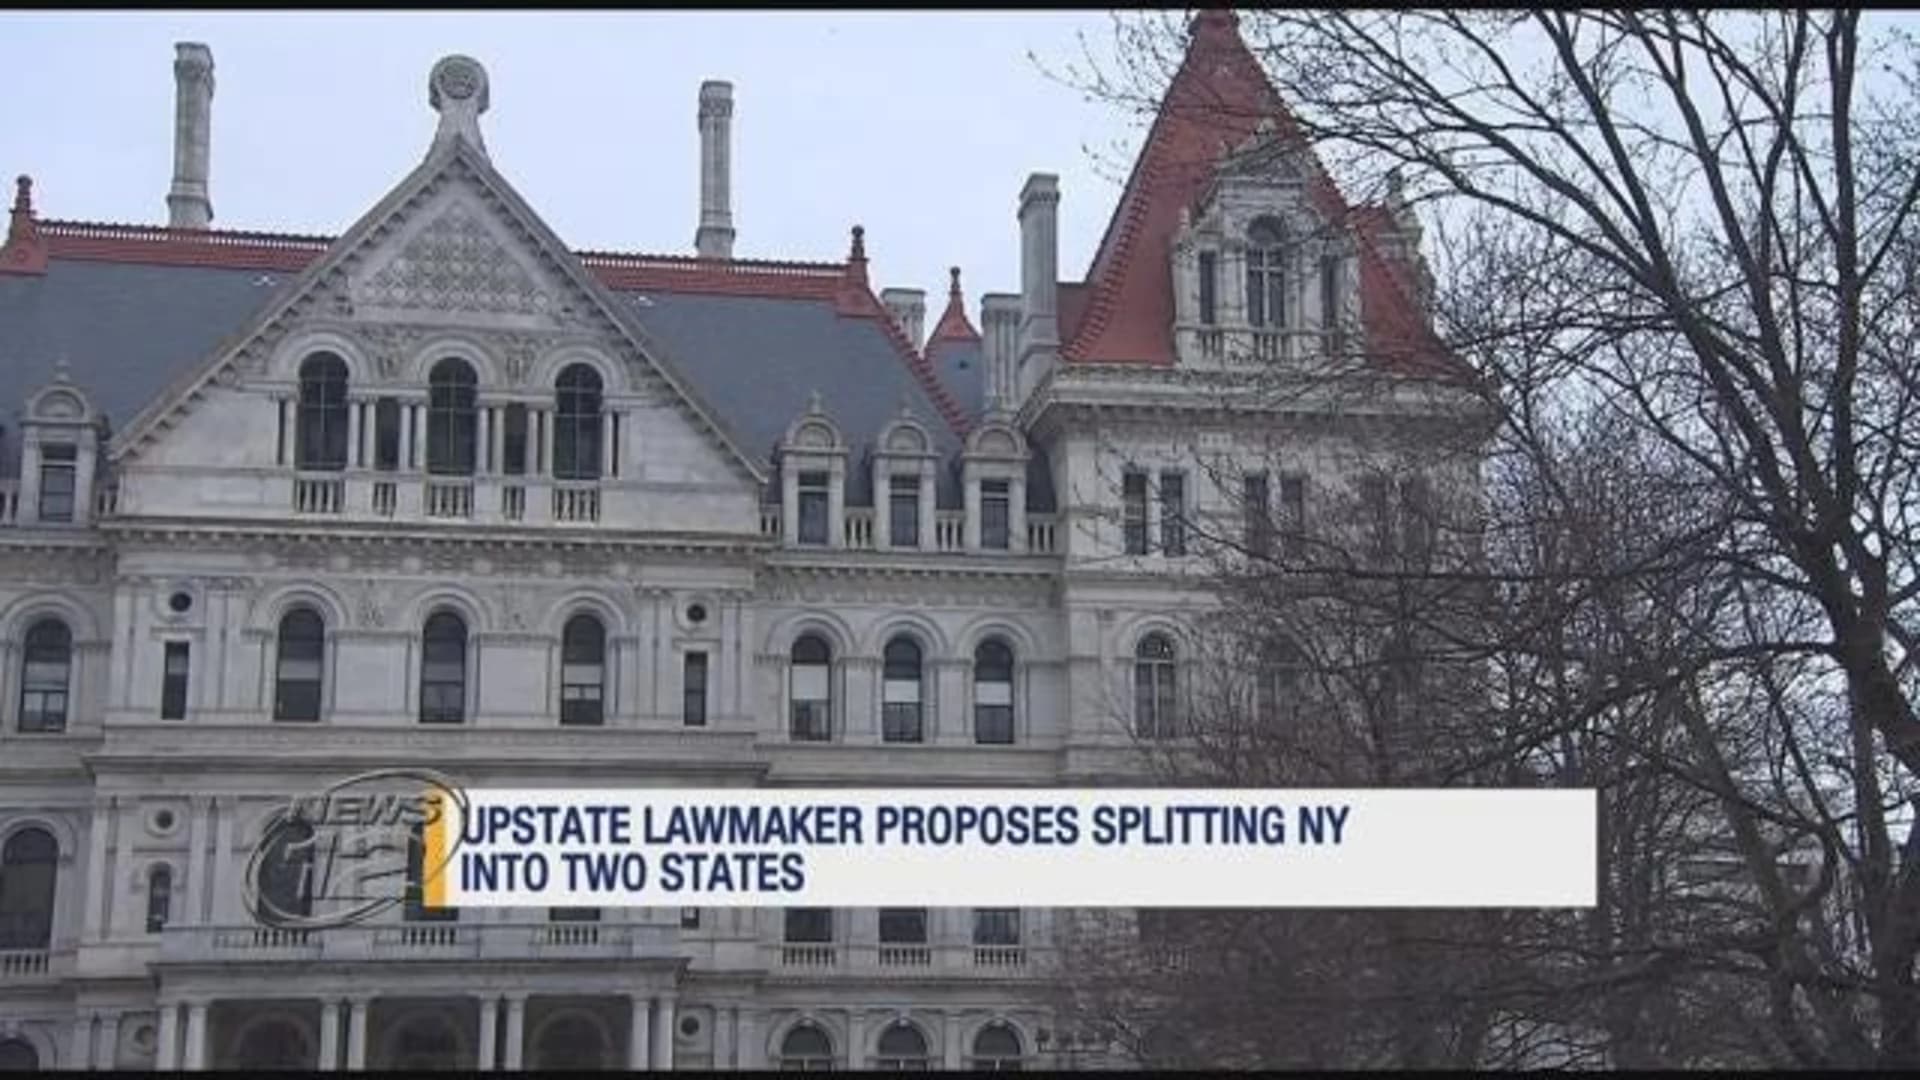 Lawmaker proposes study on splitting NY into 2 states